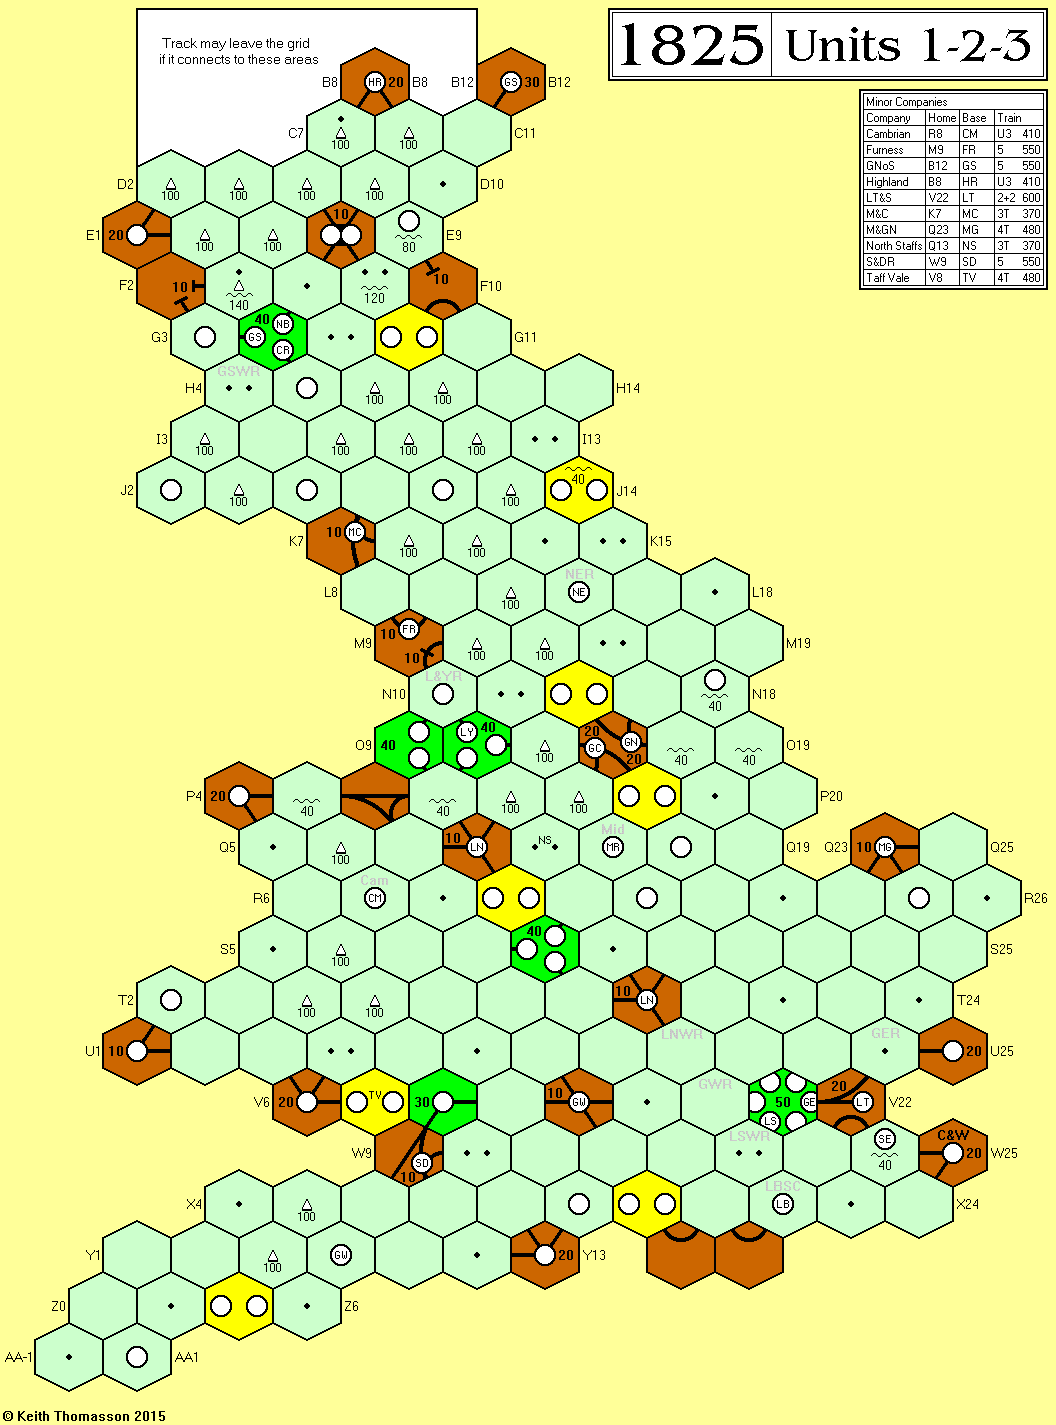 1825 Units 1, 2 and 3 map - click to view hex references